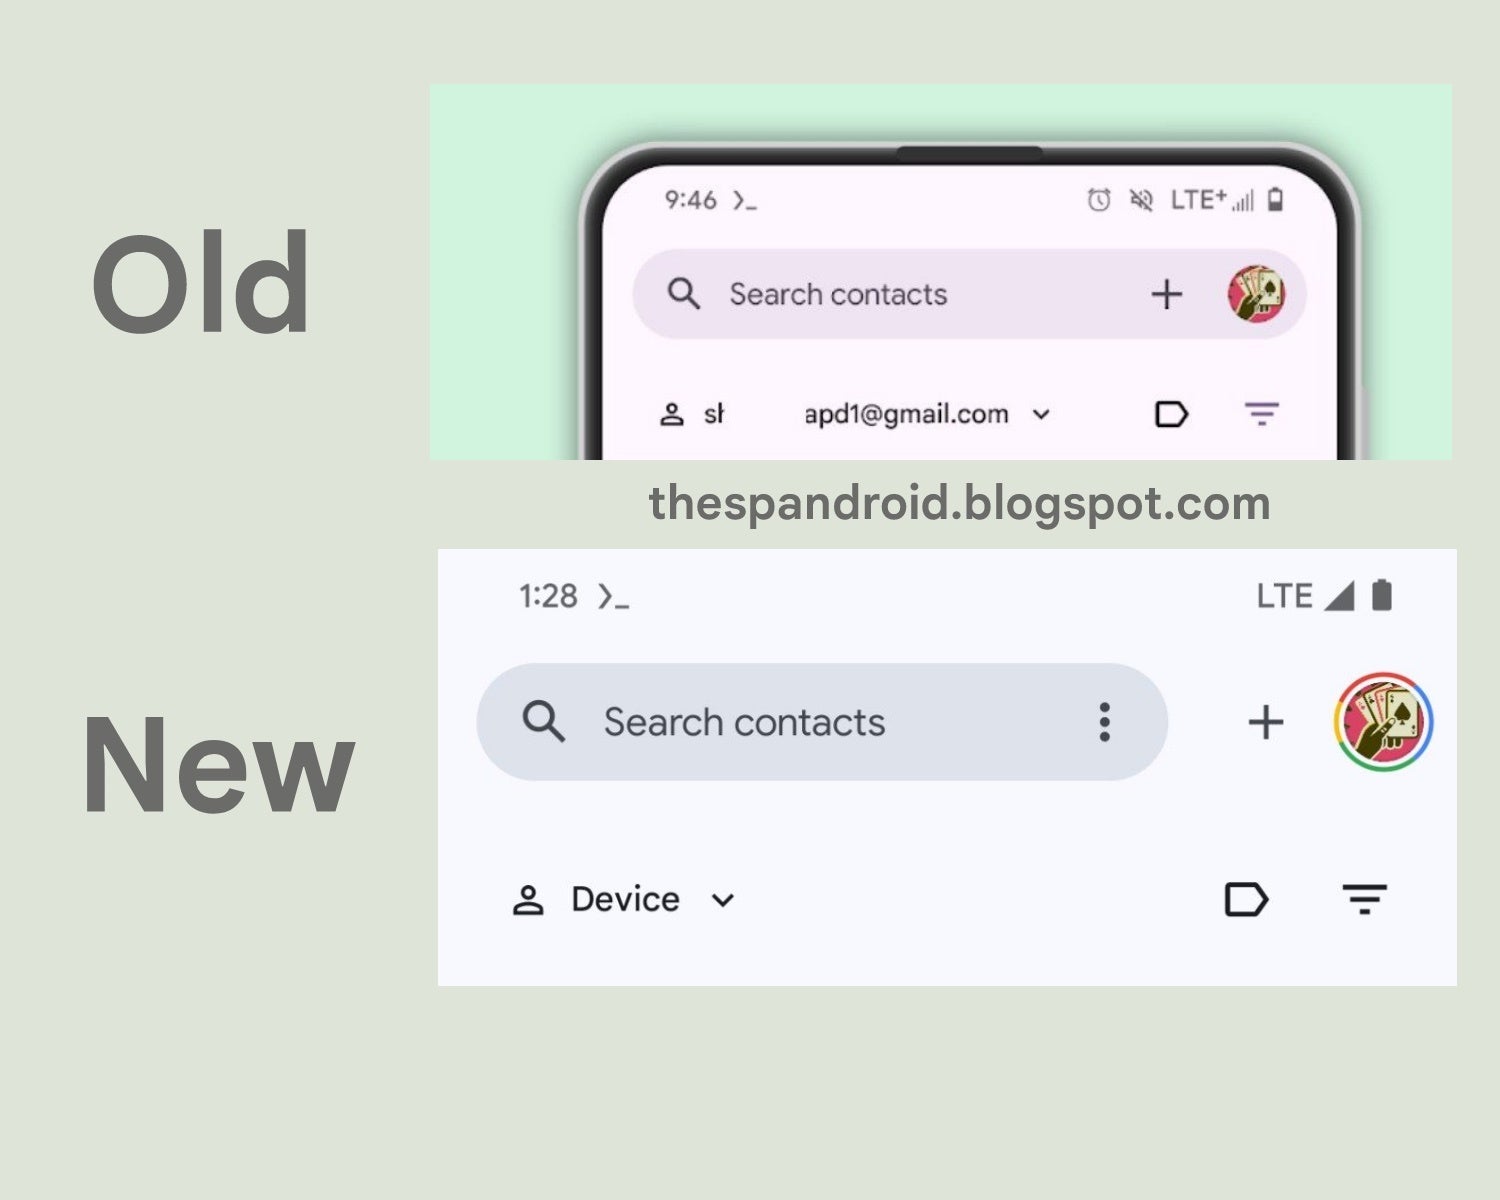 Google tests a more compact search bar in its native Contacts app